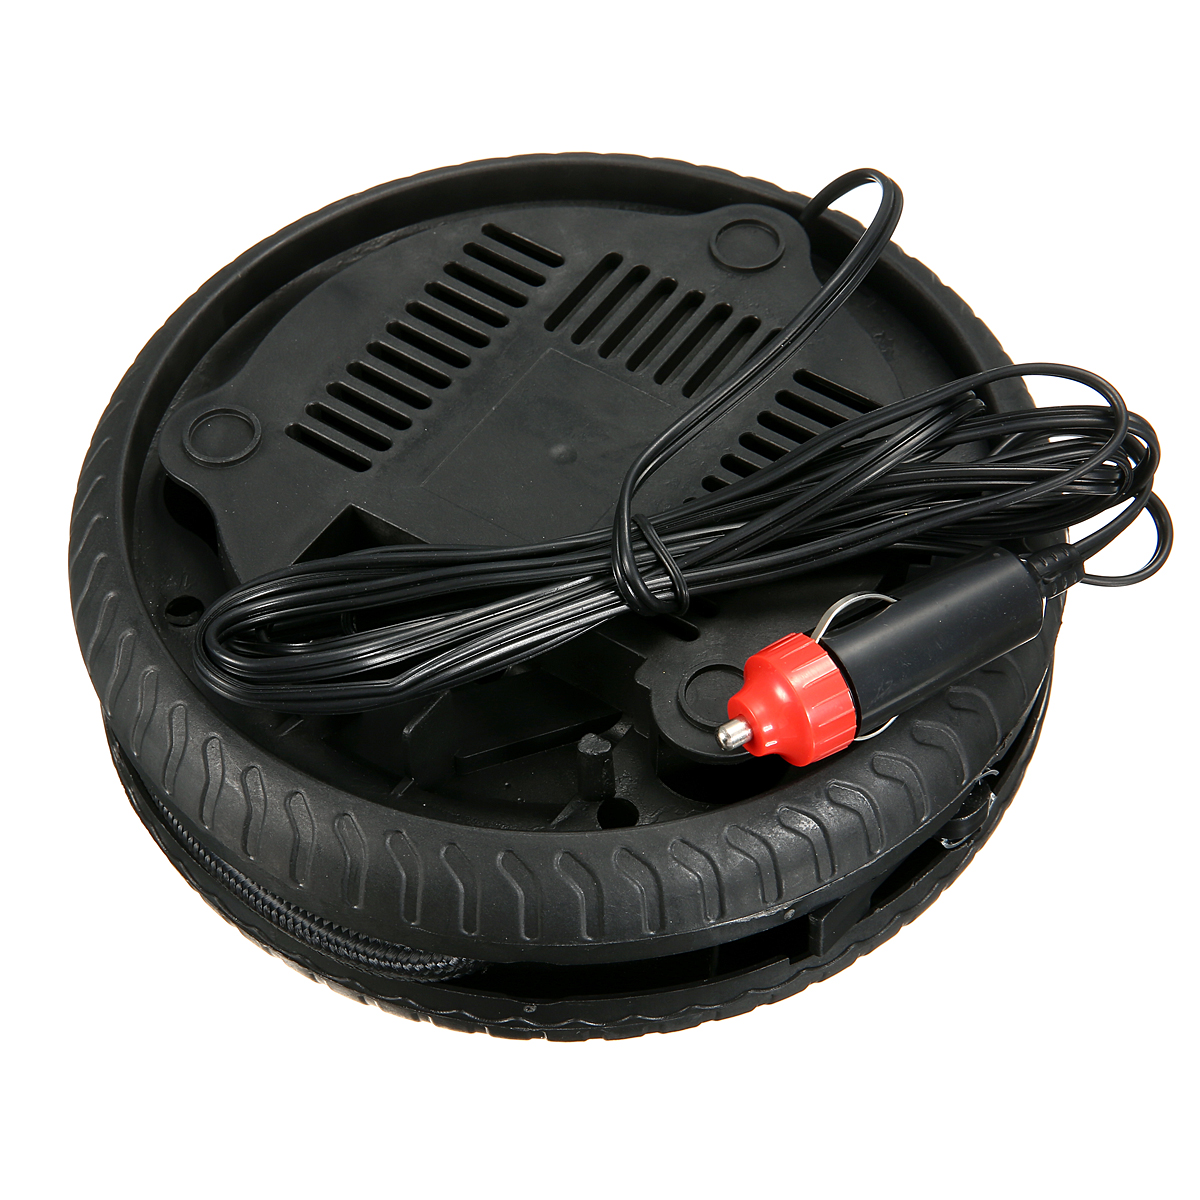 AUGIENB-DC-12V-260PSI-Tyre-Inflator-Vehicle-Car-Air-Pump-Inflatable-Compressor-Inflator-1458312-8